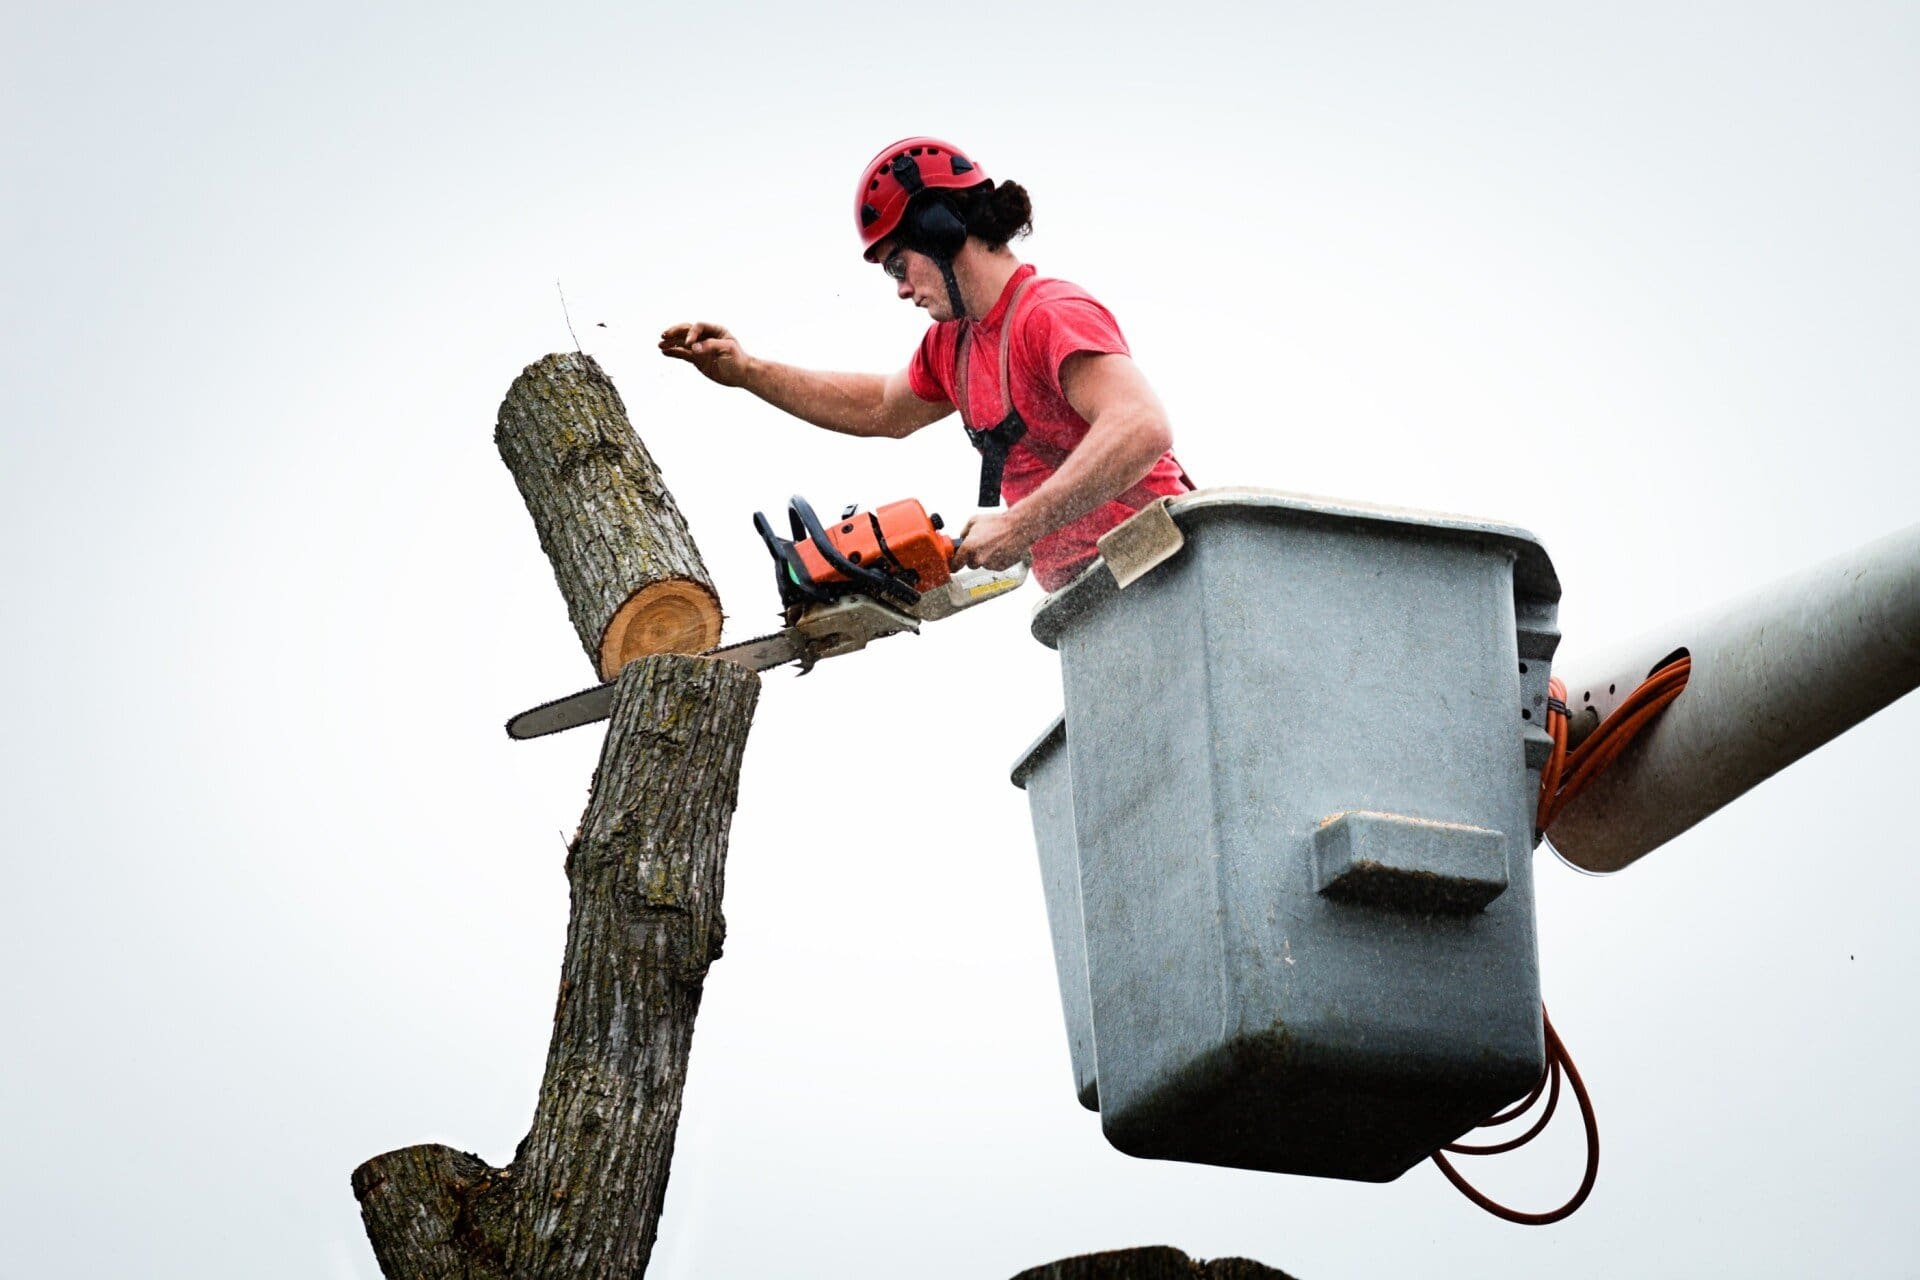 arborist in La Mesa, San Diego. In a bucket truck high above the ground holding a chainaw, just cut a limb off a tree. The limb is falling to the ground